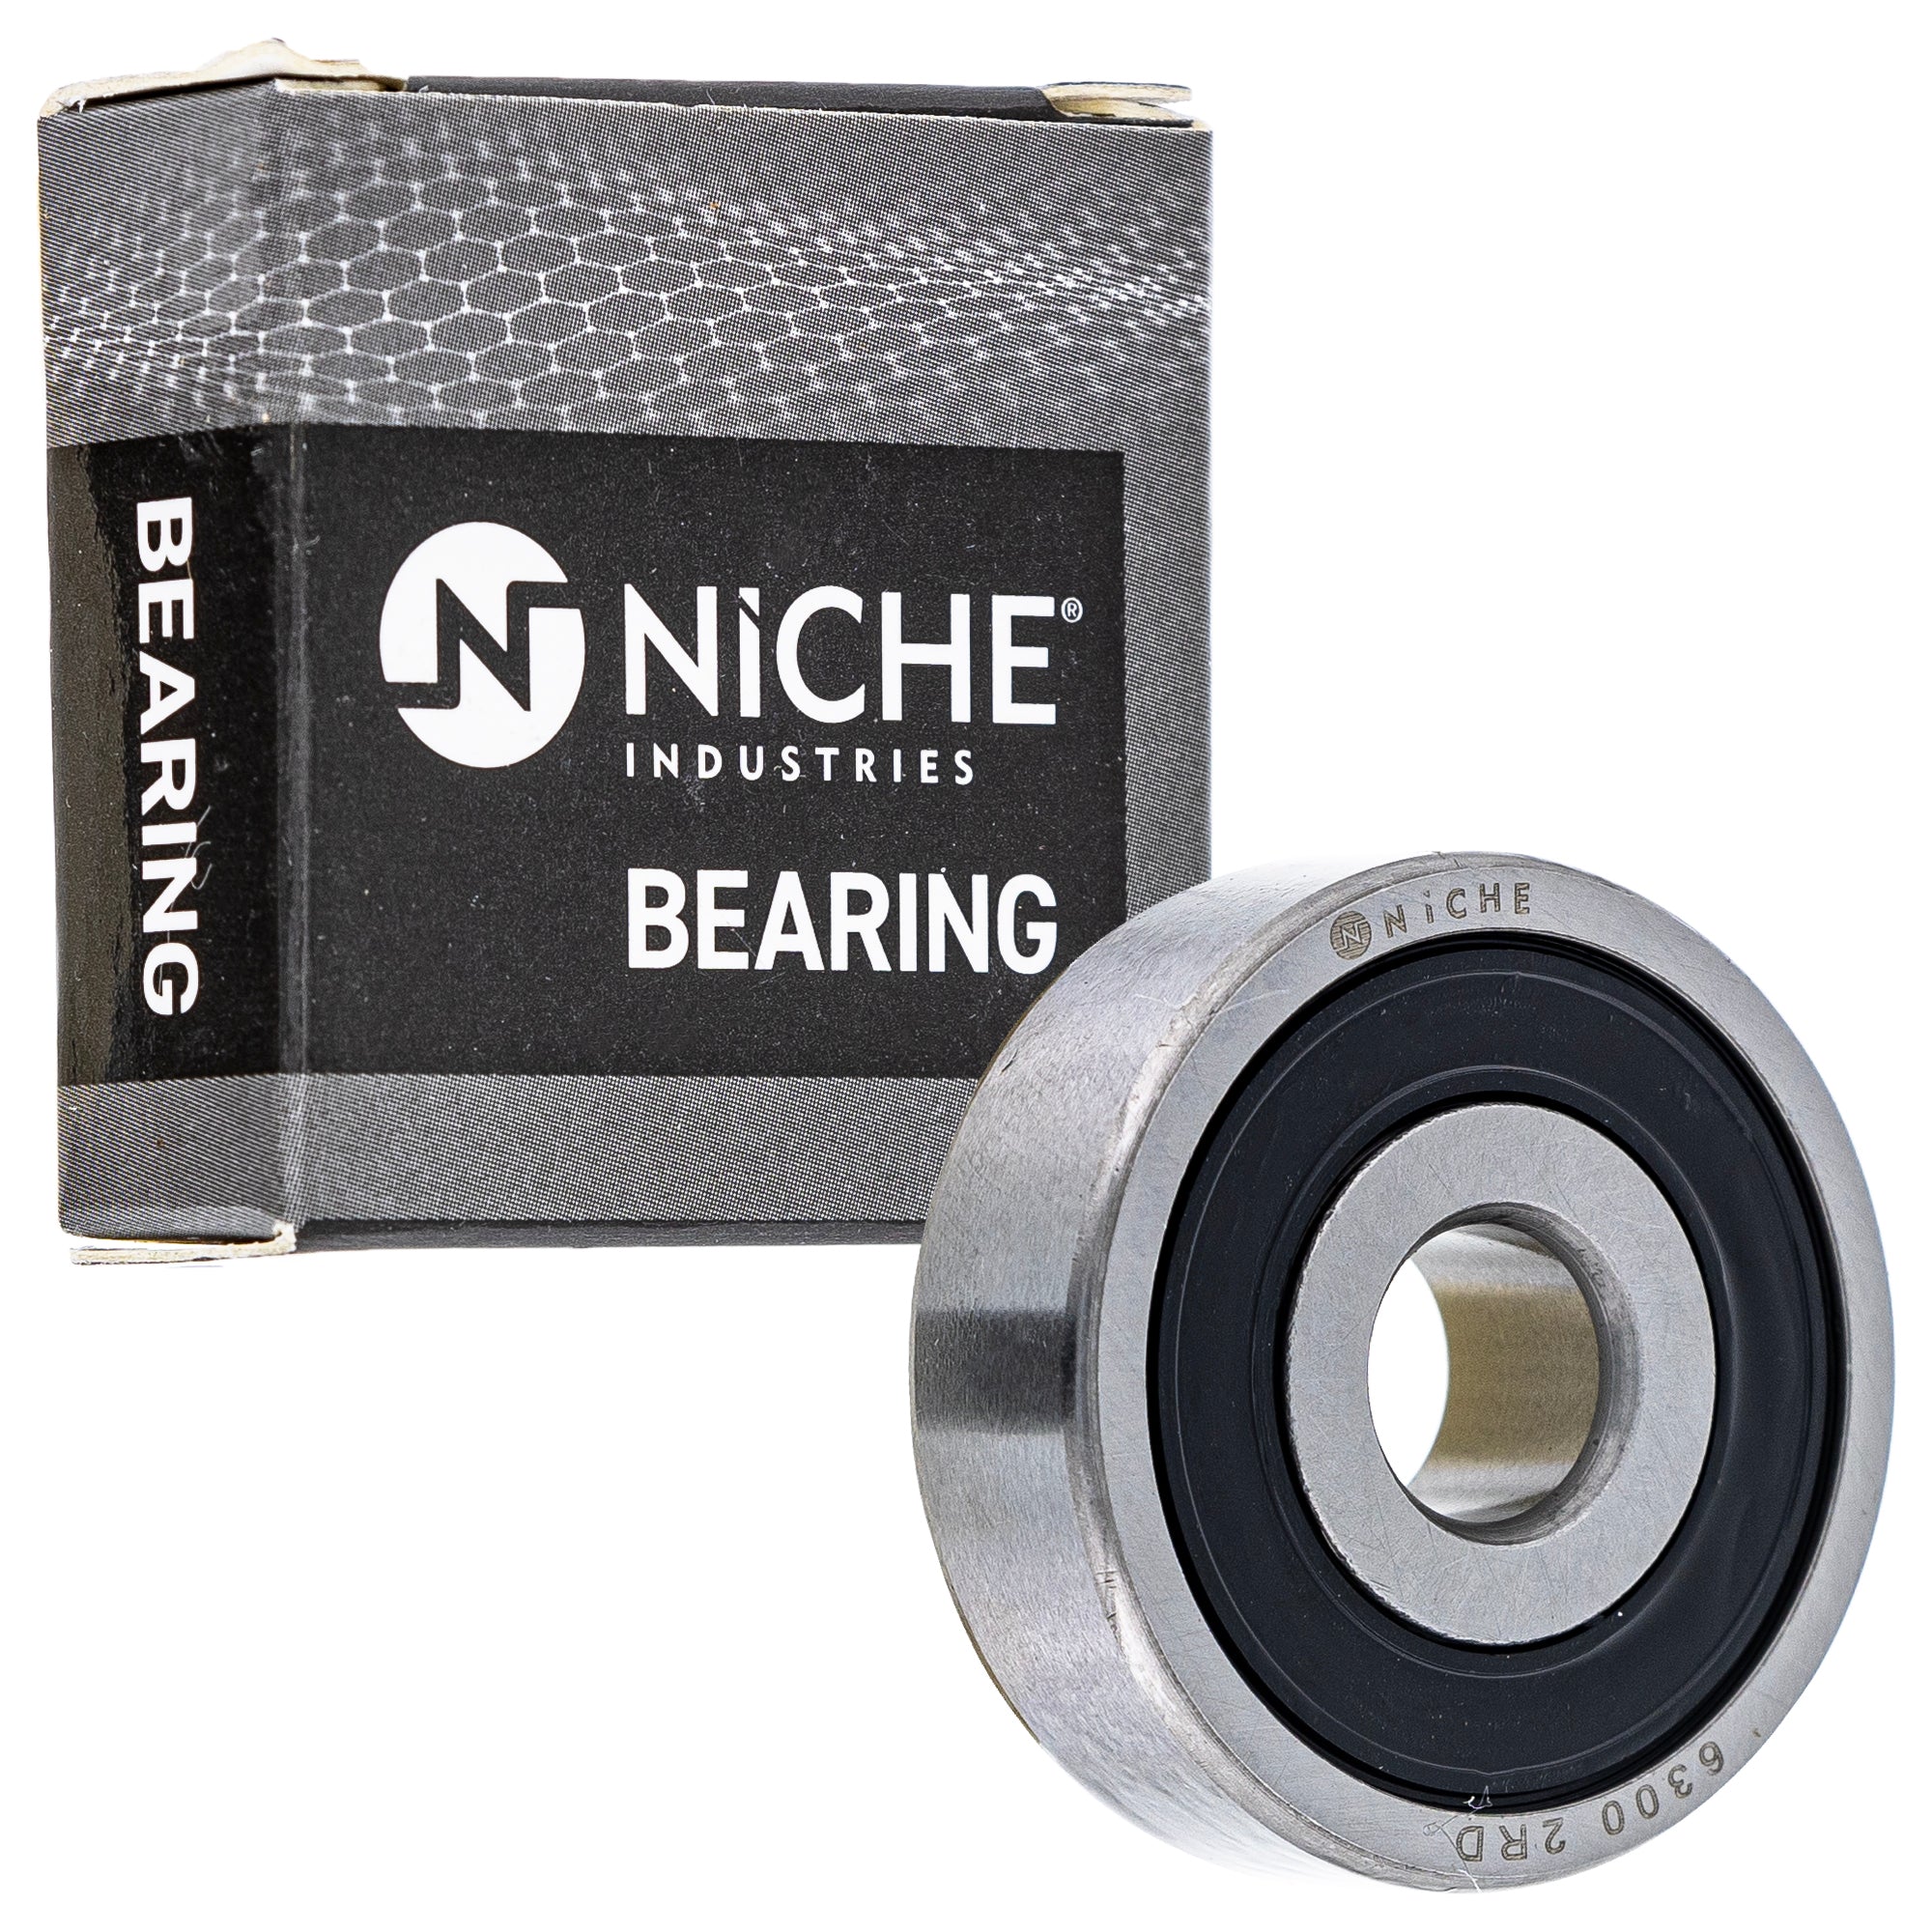 NICHE 519-CBB2331R Bearing 10-Pack for zOTHER RD60